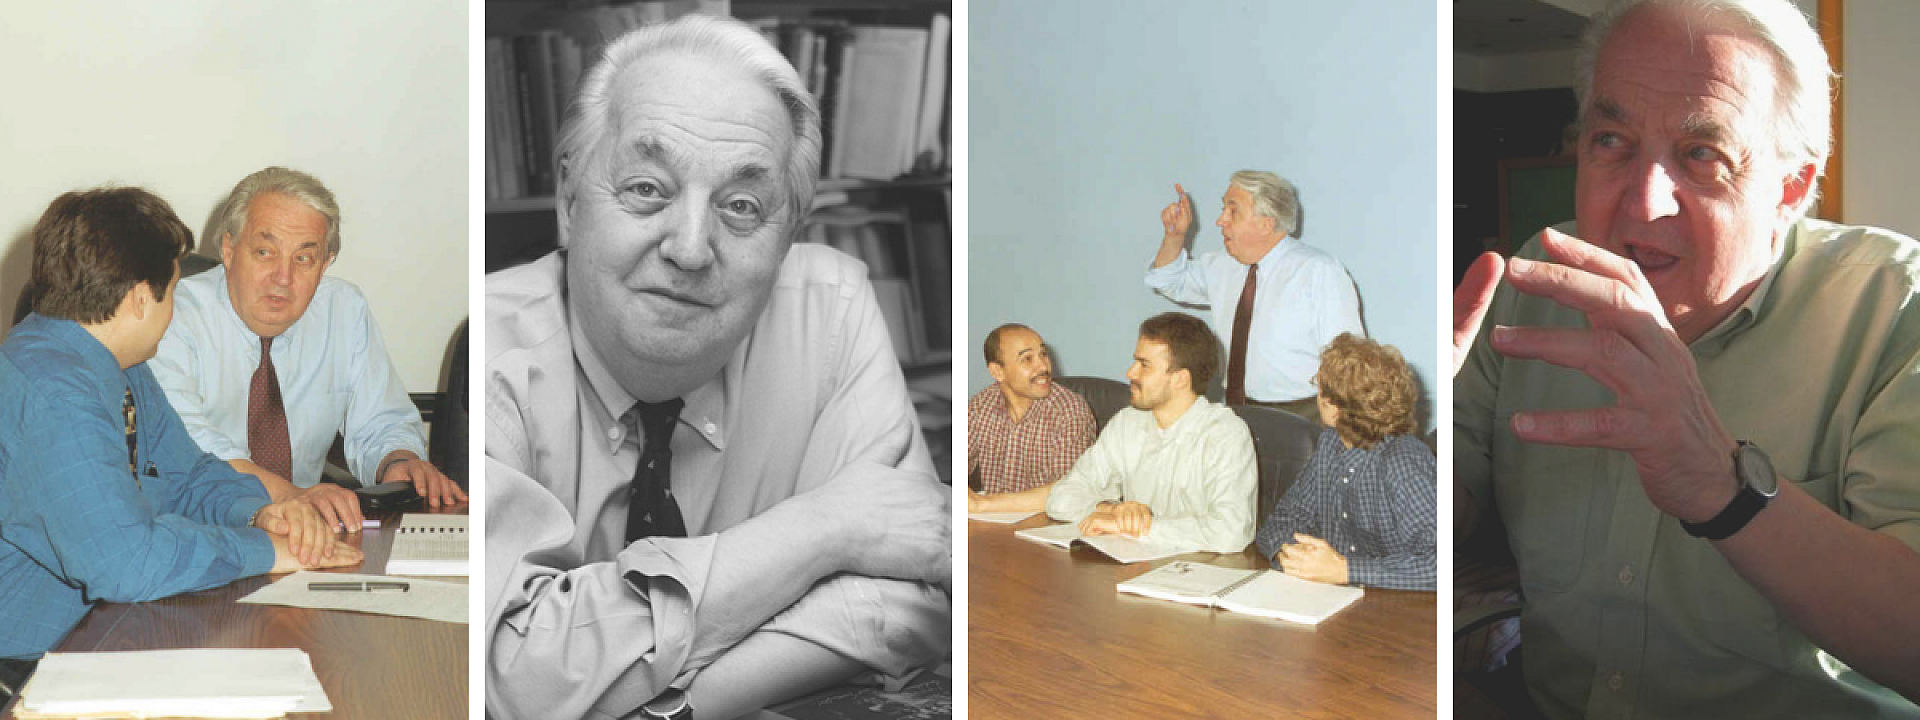 4 photos of Professor Gilles Paquet throughout his carreer at the Telfer School of Management where he was the dean from 1981 to 1988. 